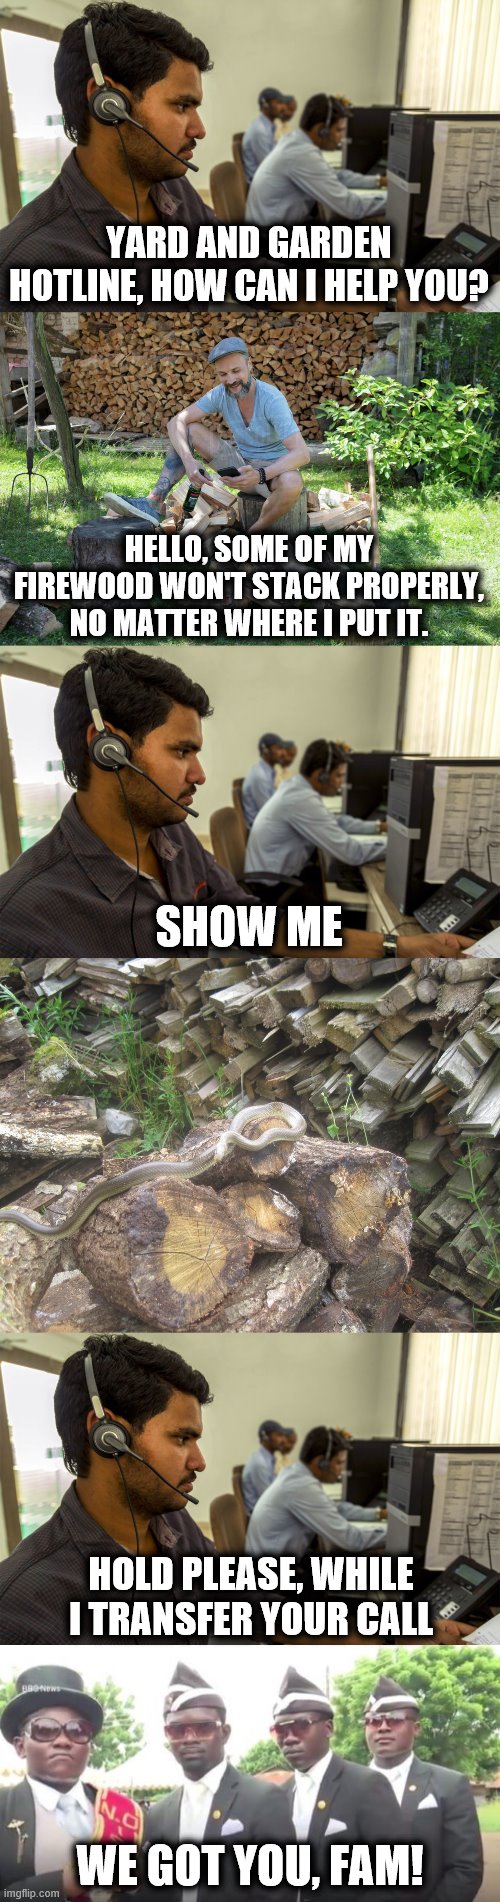 Got to be more careful | YARD AND GARDEN HOTLINE, HOW CAN I HELP YOU? HELLO, SOME OF MY FIREWOOD WON'T STACK PROPERLY, NO MATTER WHERE I PUT IT. SHOW ME; HOLD PLEASE, WHILE I TRANSFER YOUR CALL; WE GOT YOU, FAM! | image tagged in memes,pallbearers,snake,firewood | made w/ Imgflip meme maker